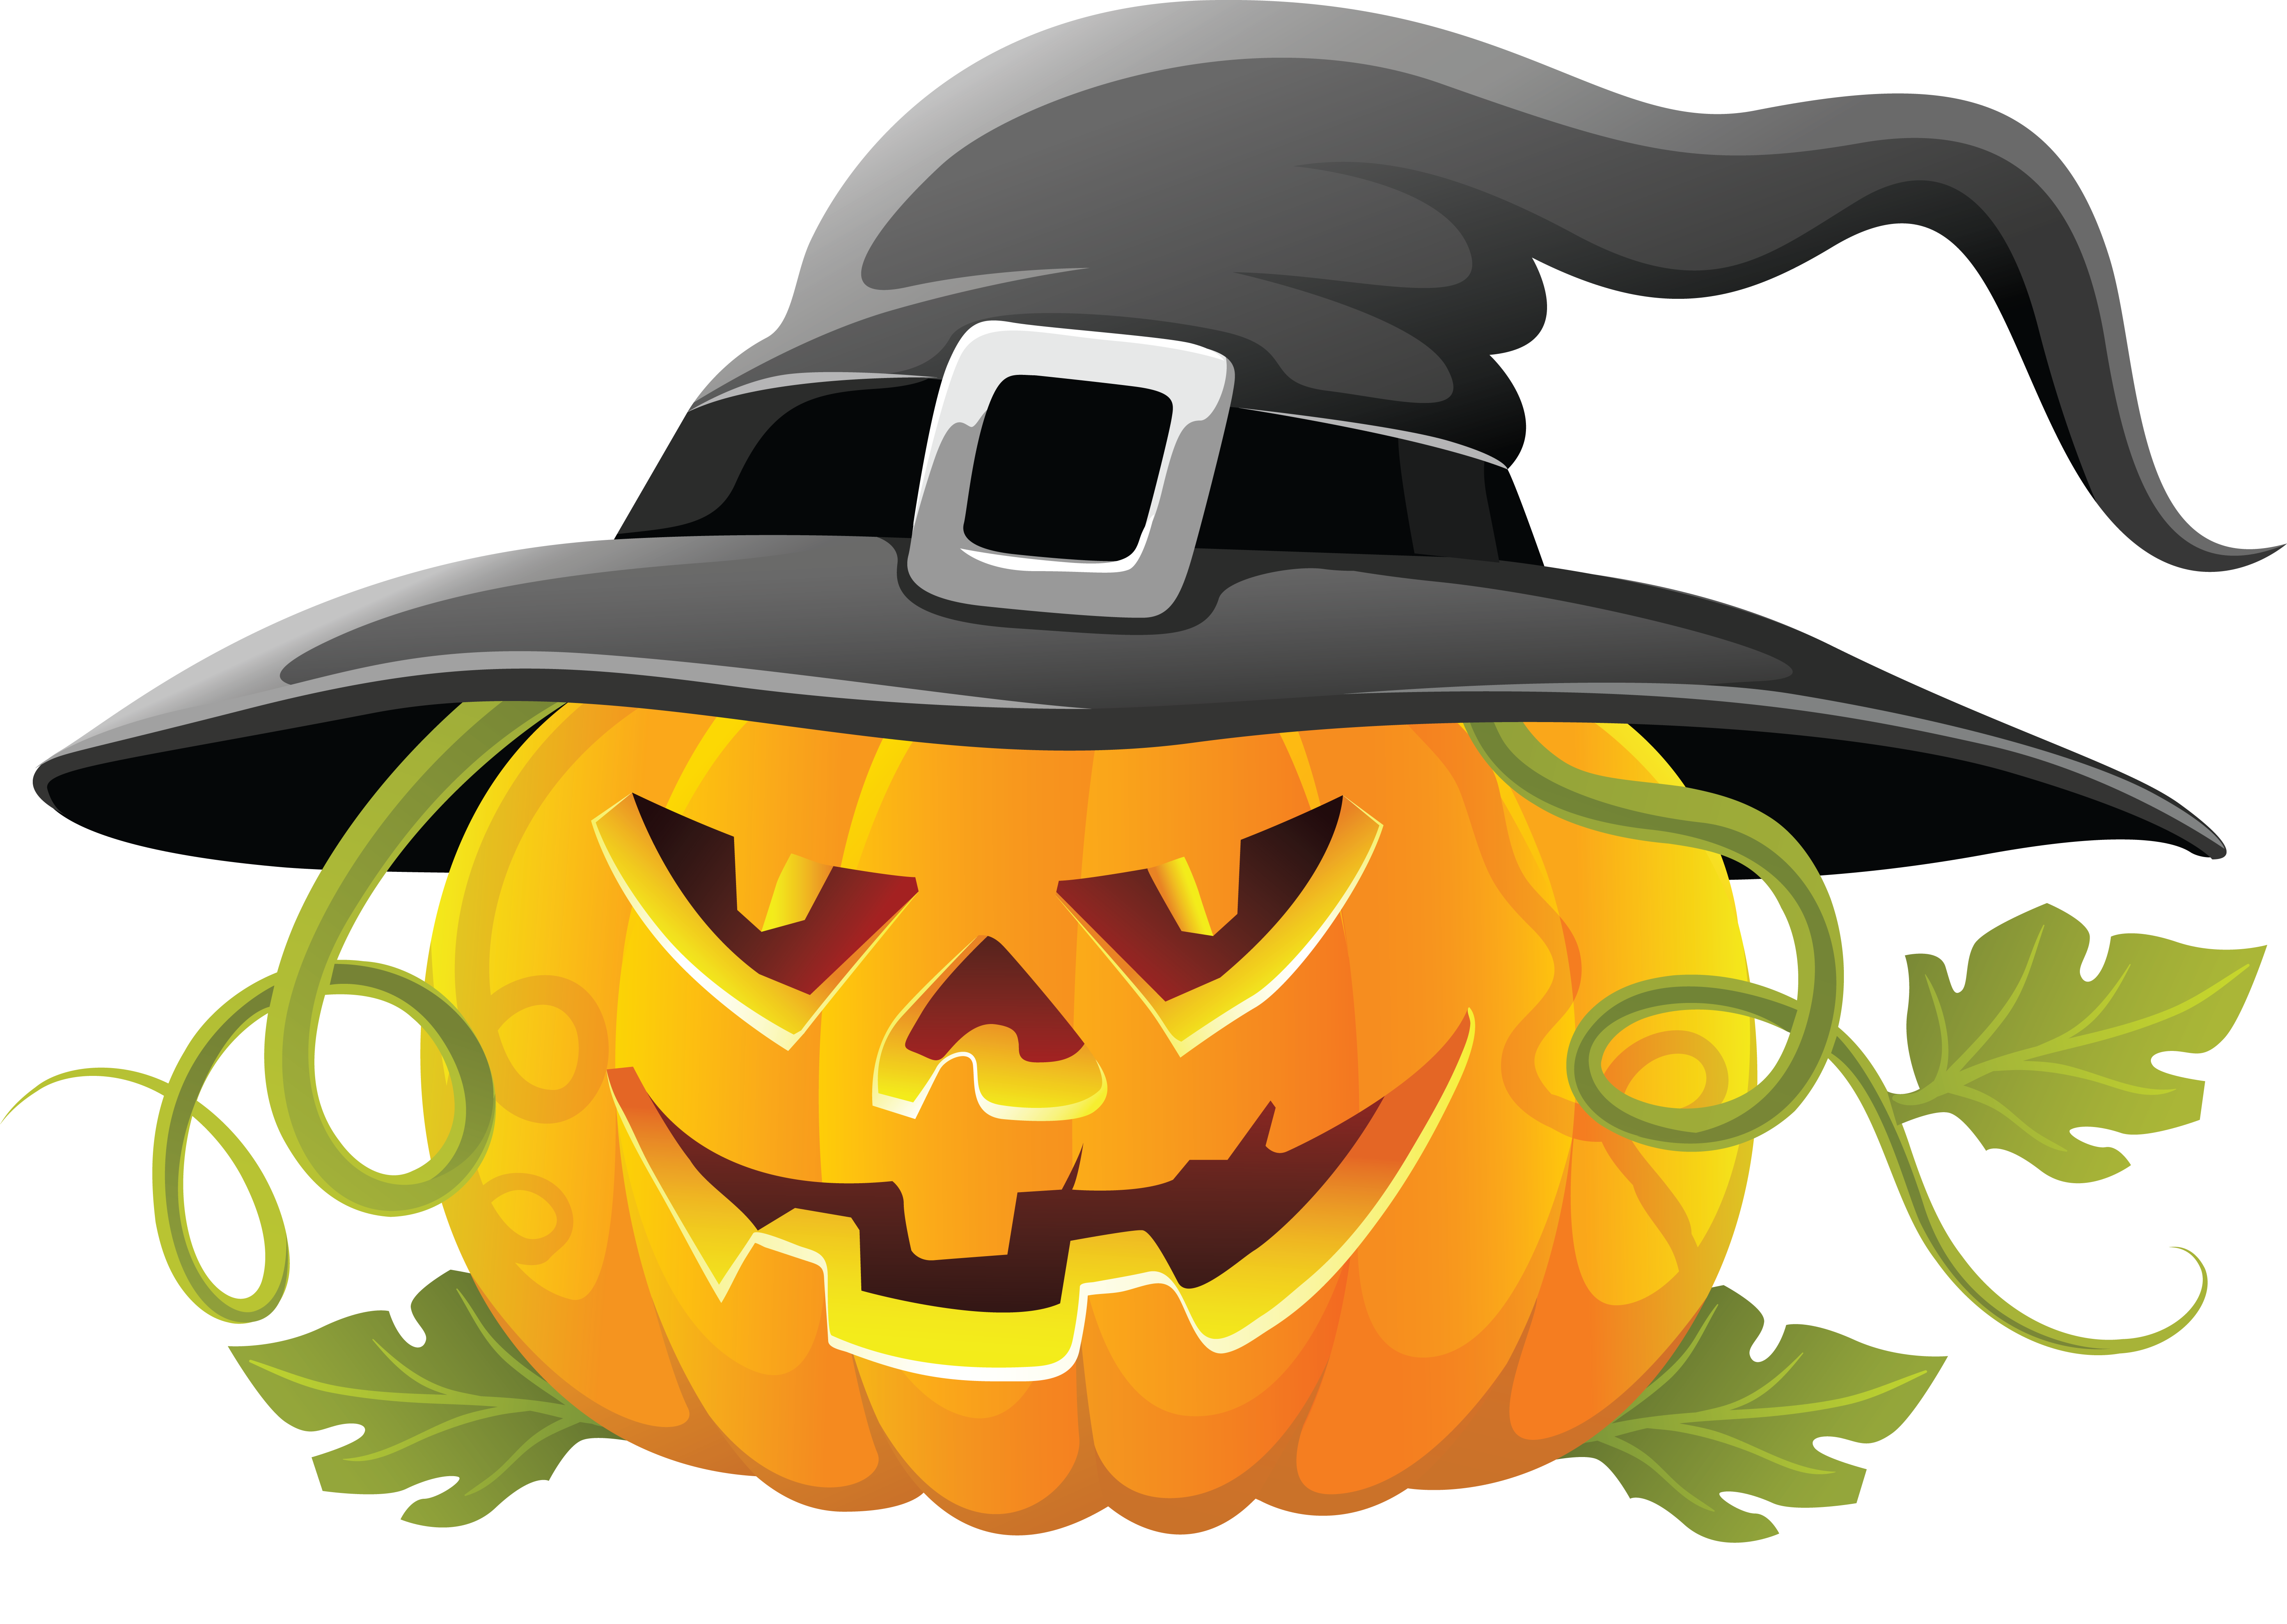 Scary face of Halloween pumpkin on transparent background PNG - Similar PNG